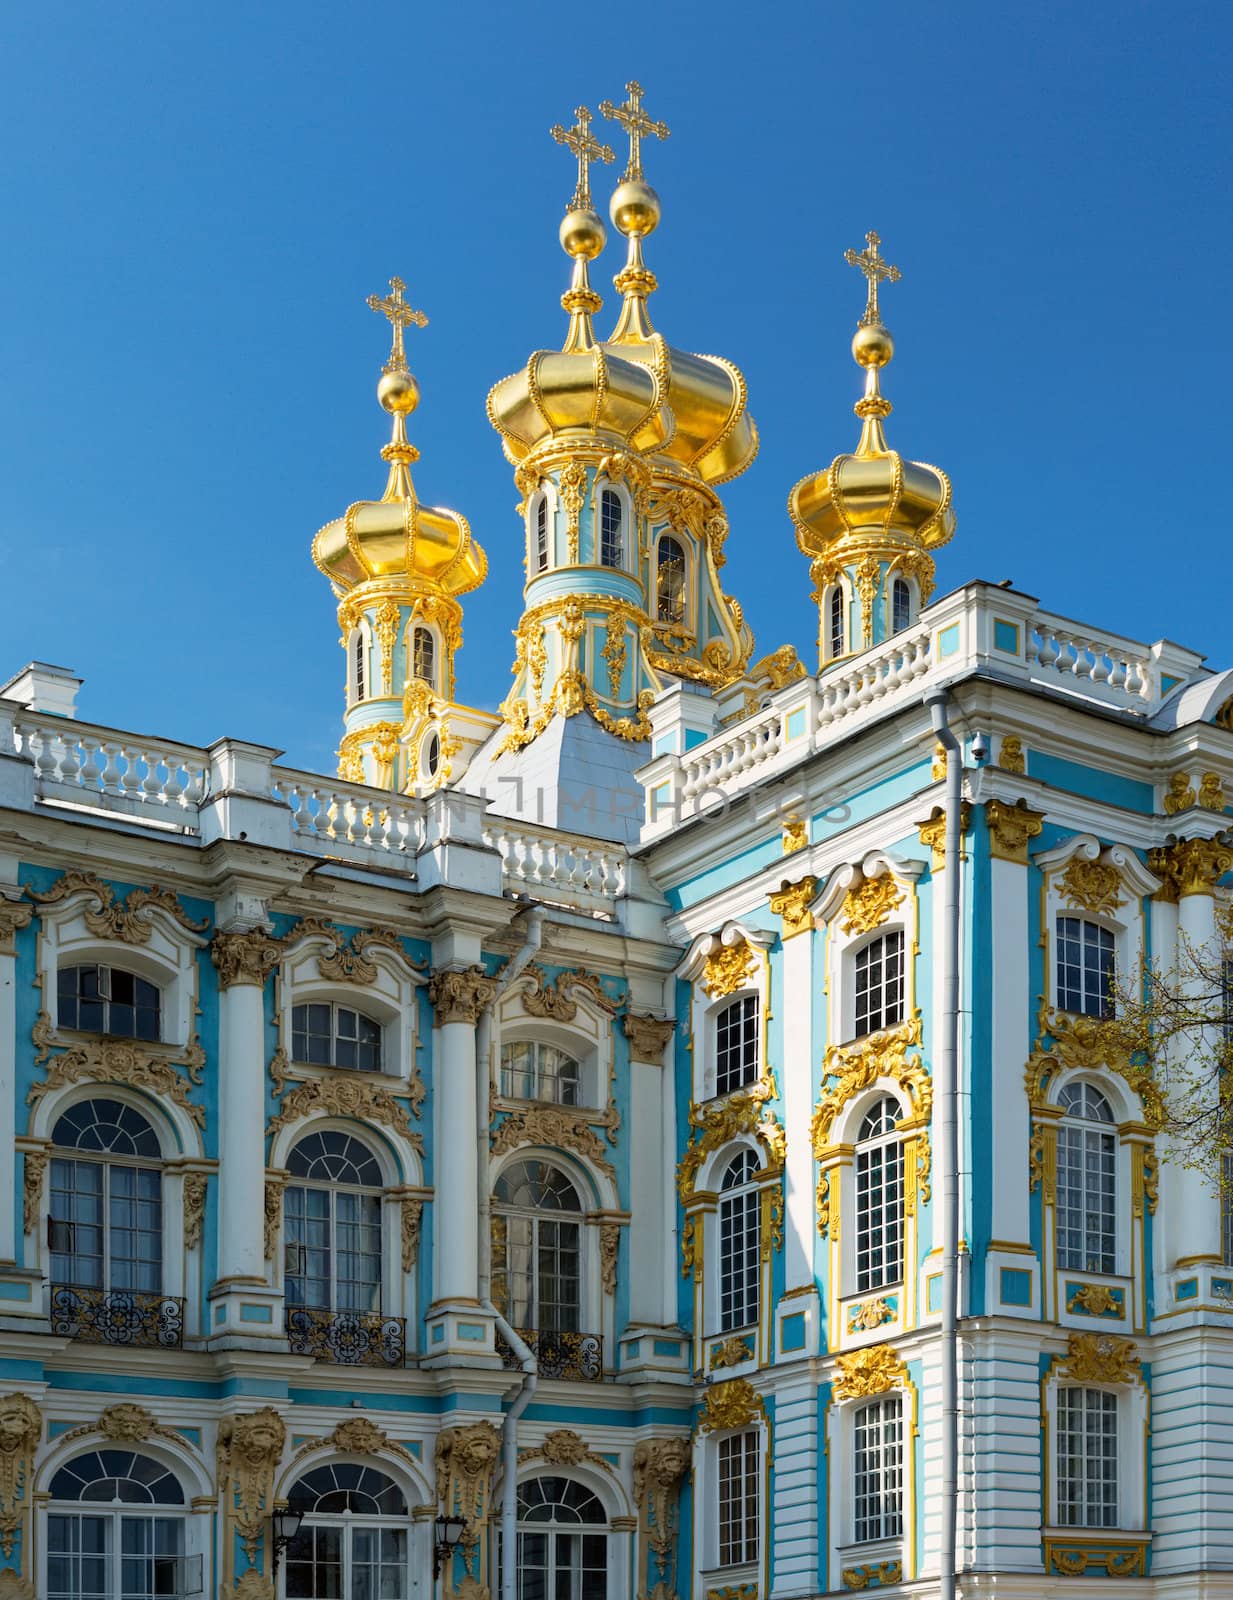 Catherine's Palace (Russian: was the Rococo summer residence of the Russian tsars, located in the town of Tsarskoye Selo (Pushkin), 25 km south-east of St. Petersburg.